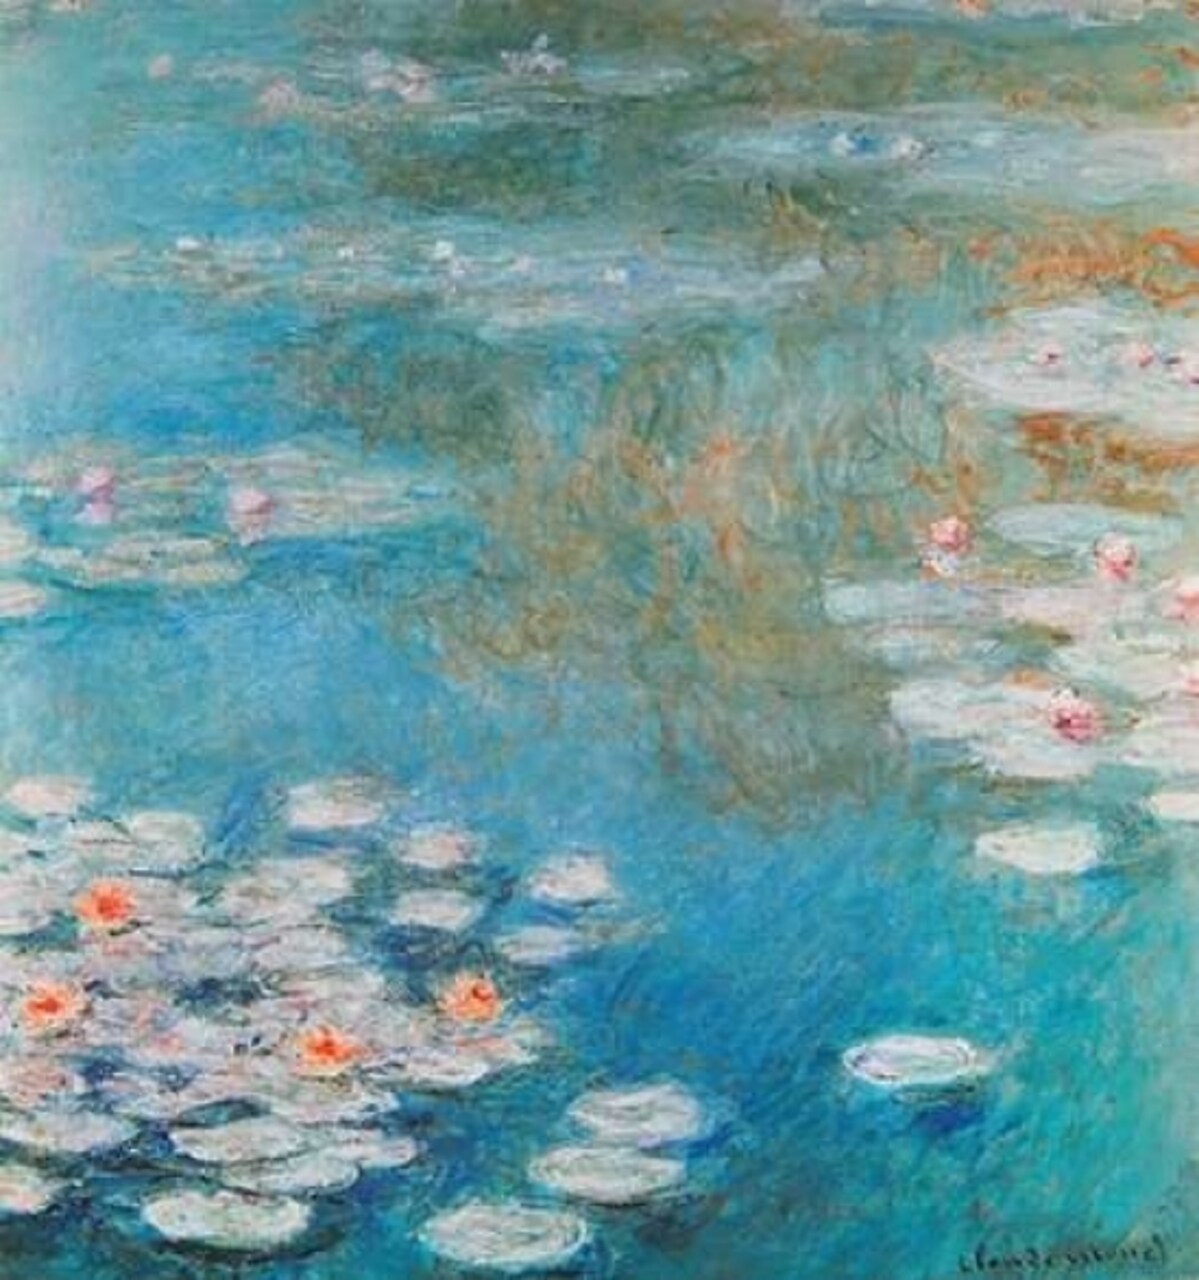 Waterlilies At Giverny 1908 Poster Print by  Claude Monet - Item # VARPDX373871